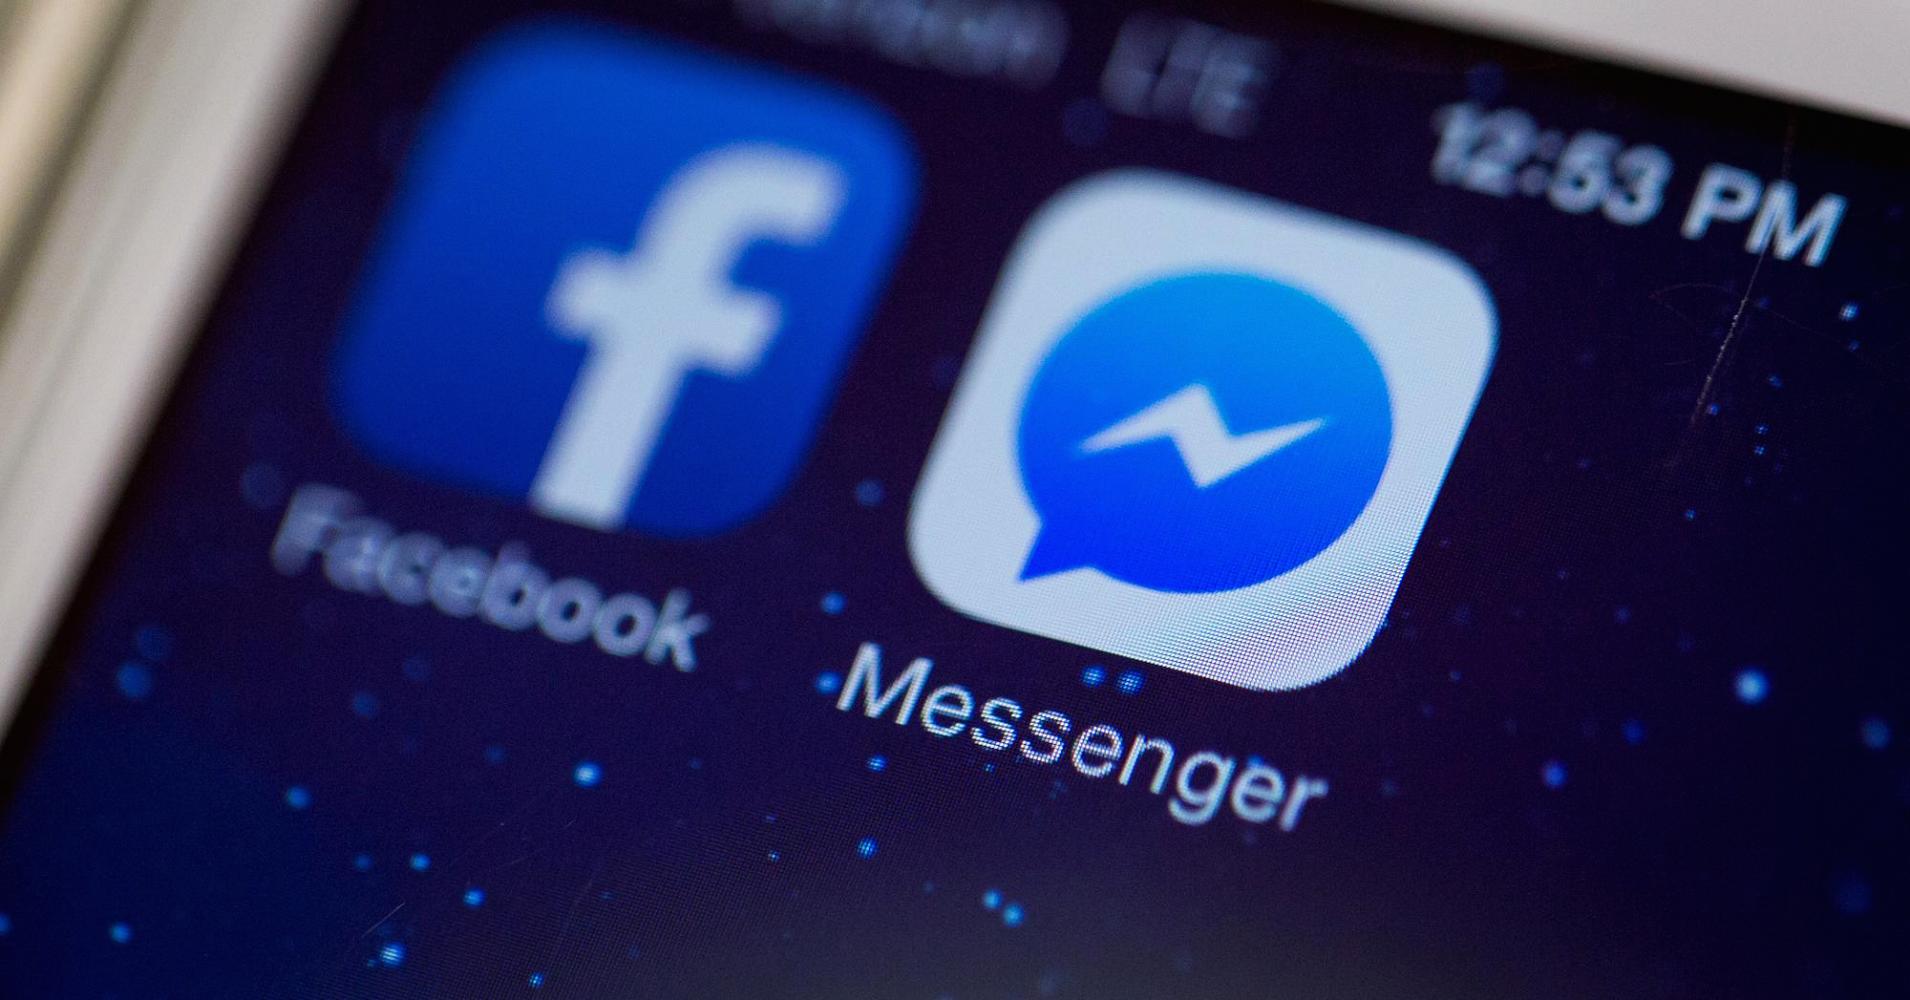 Facebook to roll out 'end to end encryption' on Messenger